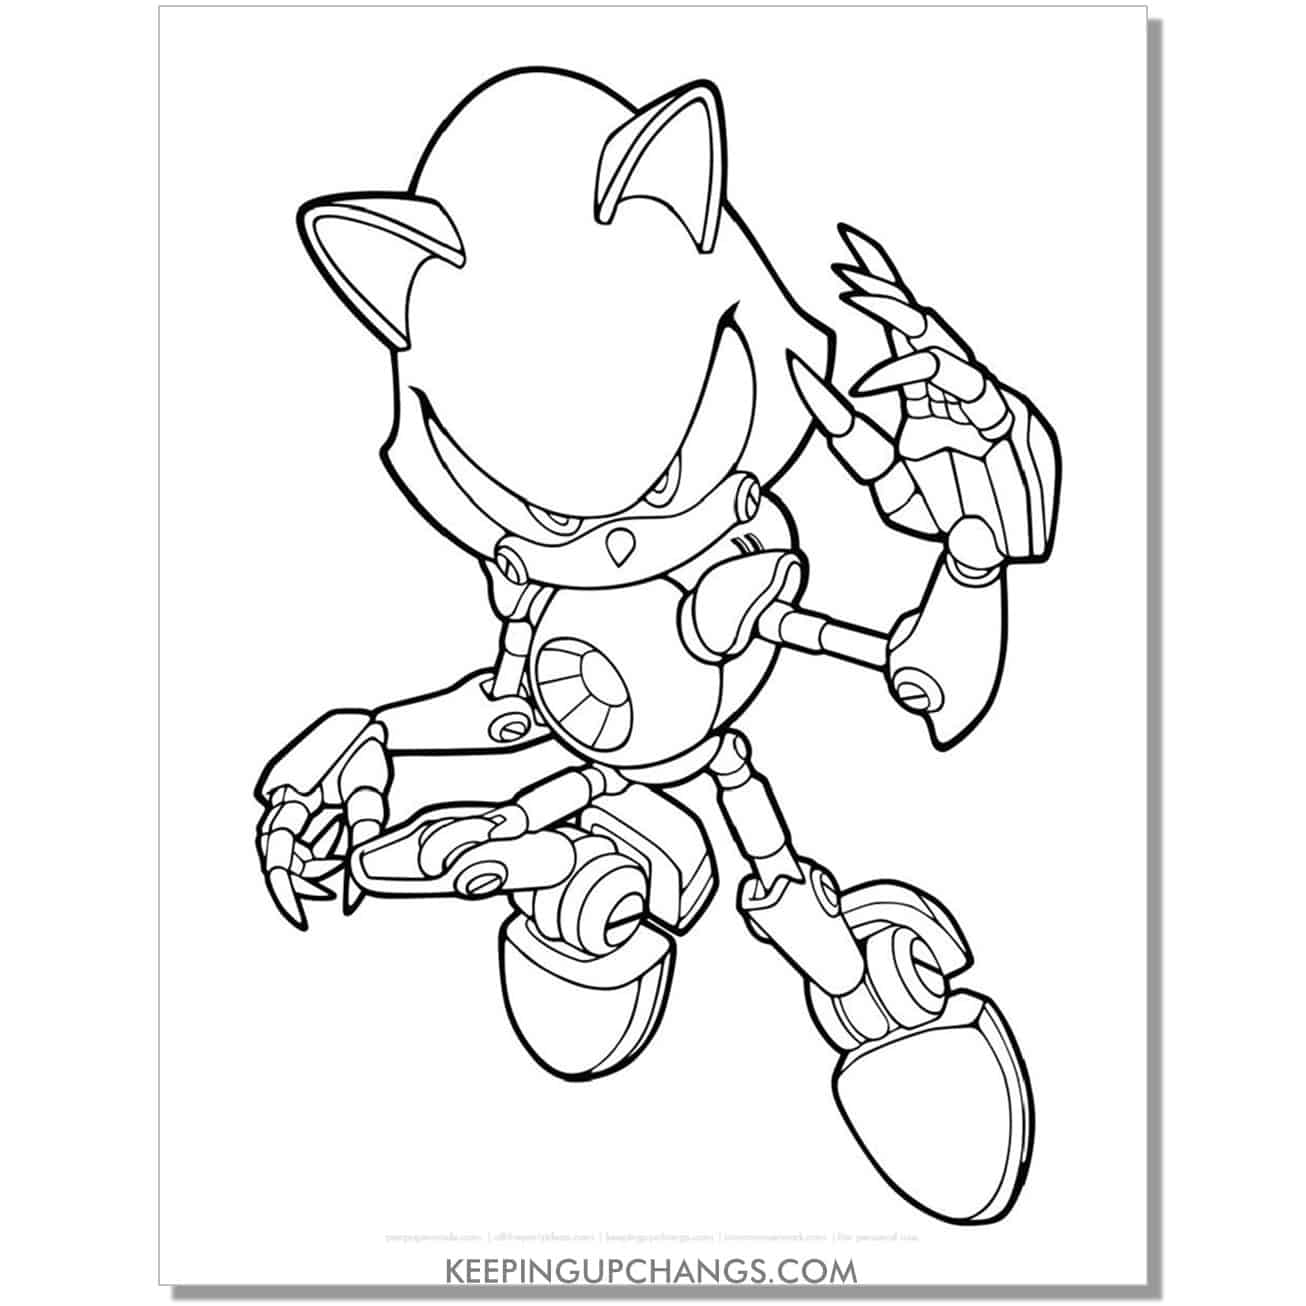 metal sonic villain coloring page.